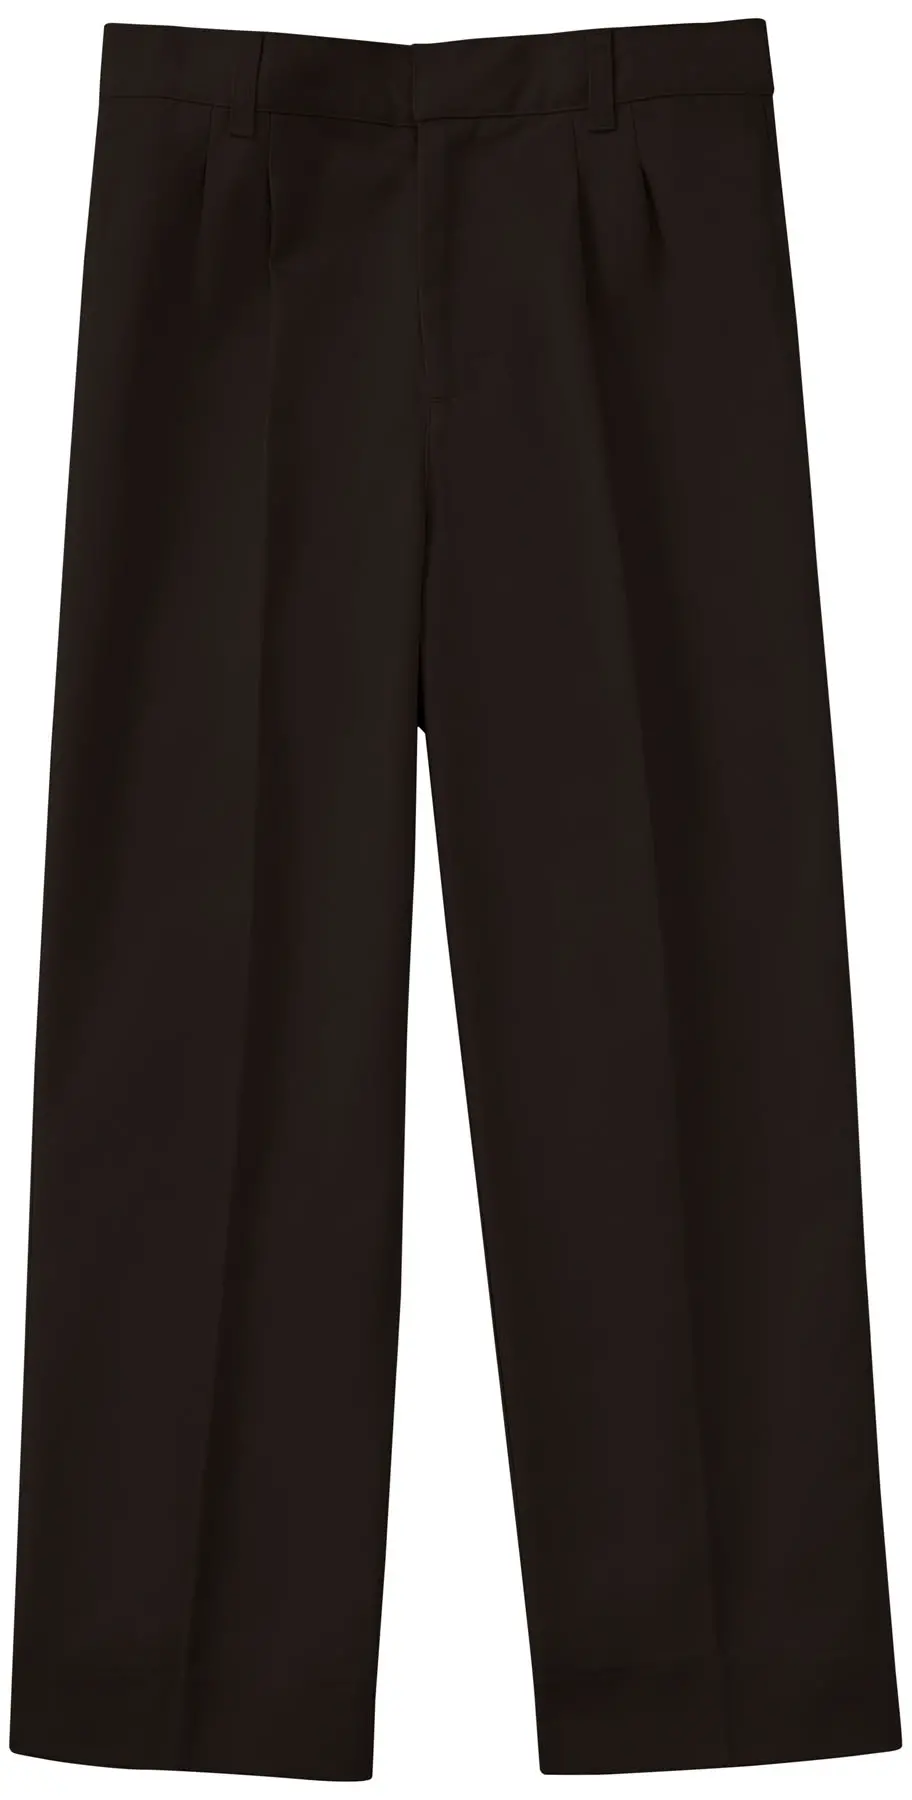 Men's Tall Pleat Front Pant 34" Inseam